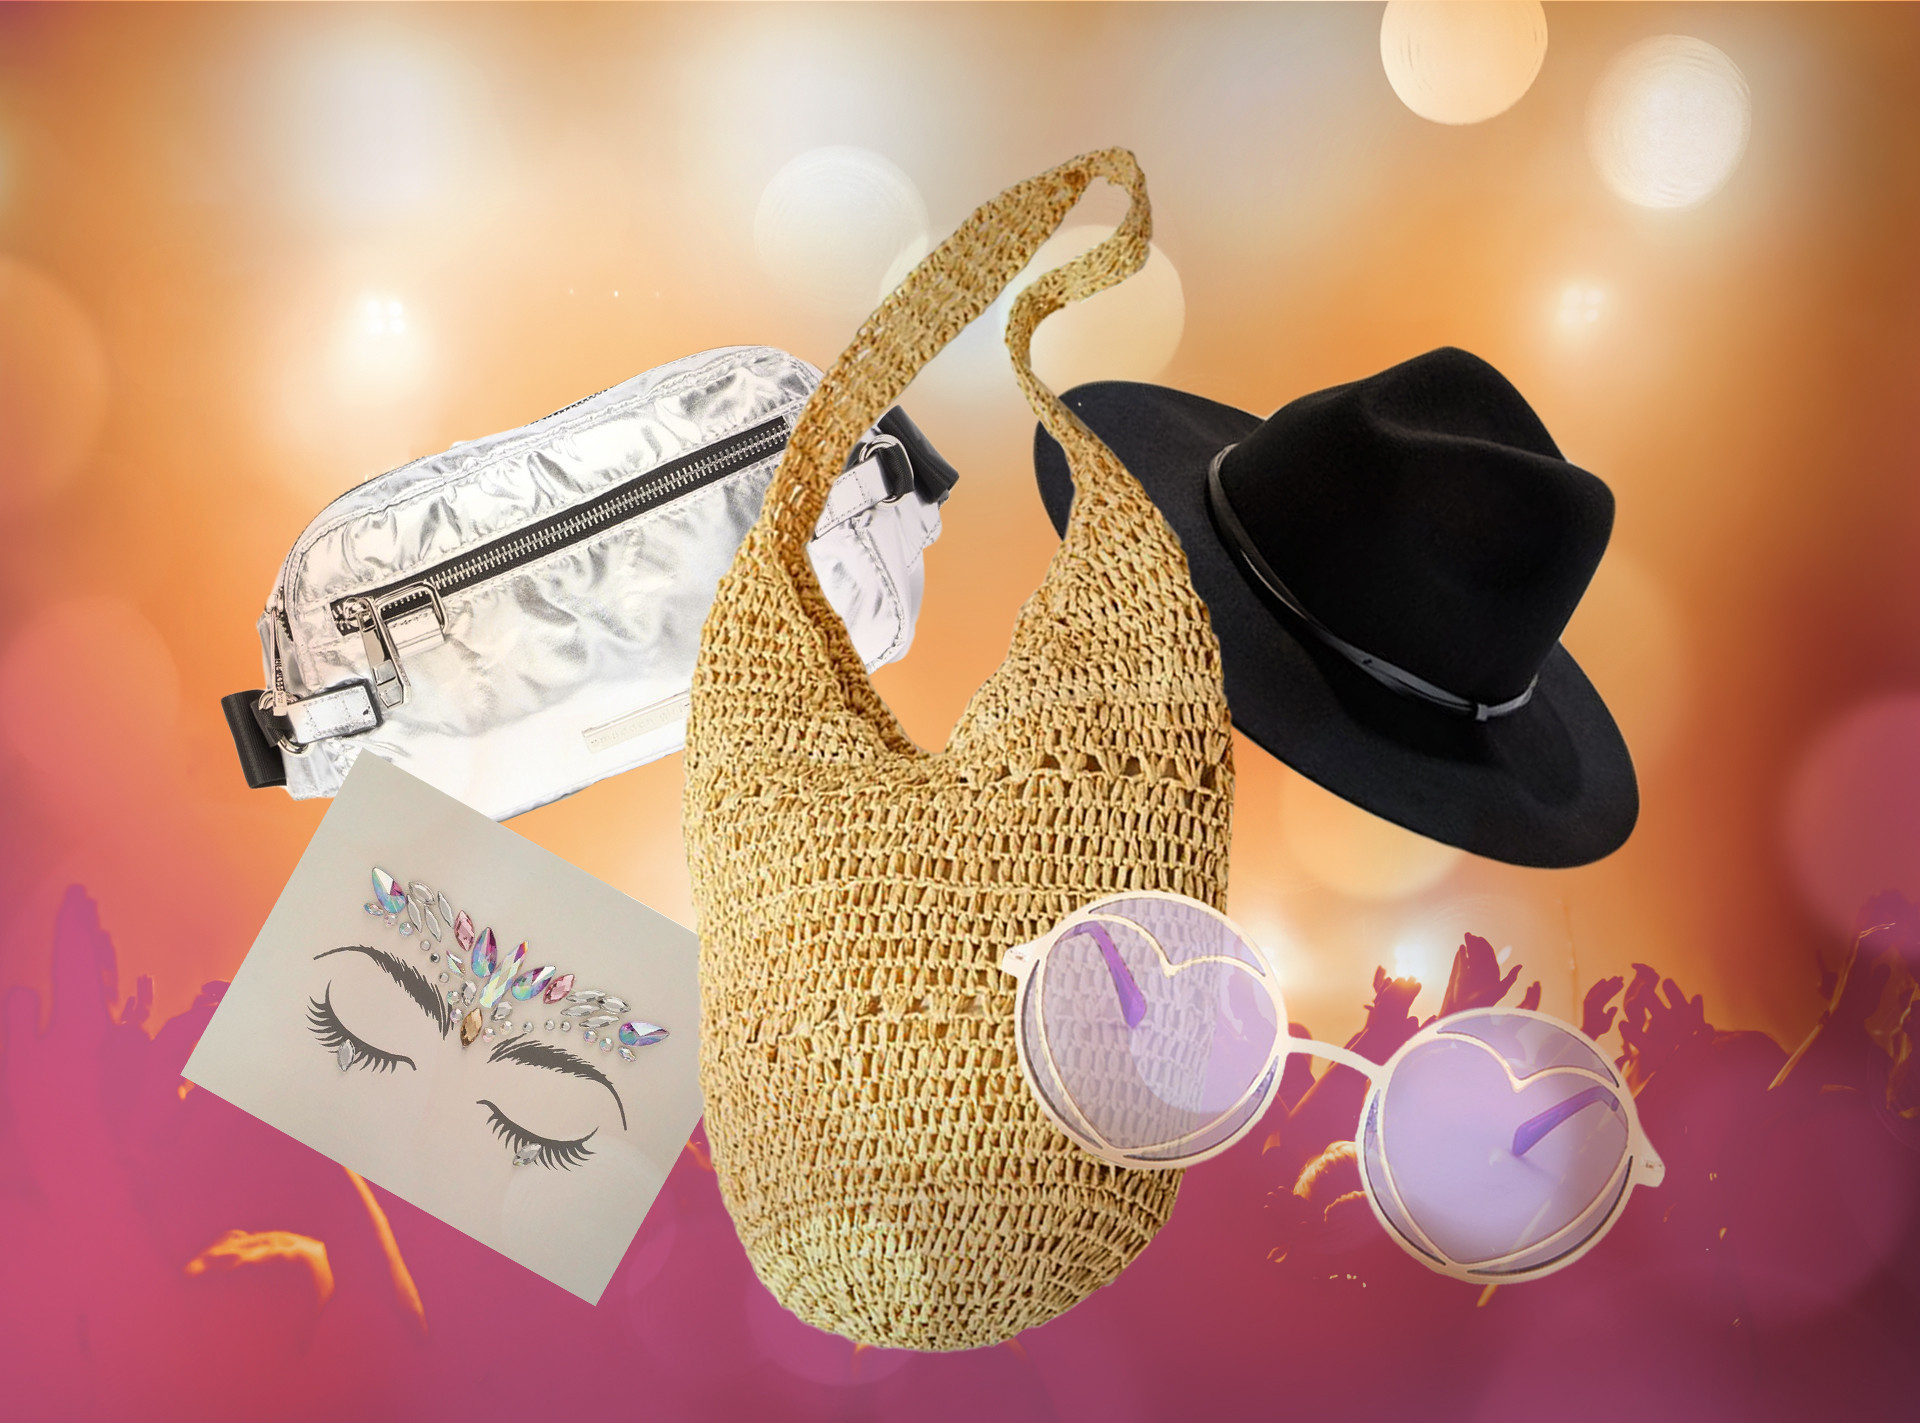 Accessories to Absolutely Nail Festival Weekend - E! Online